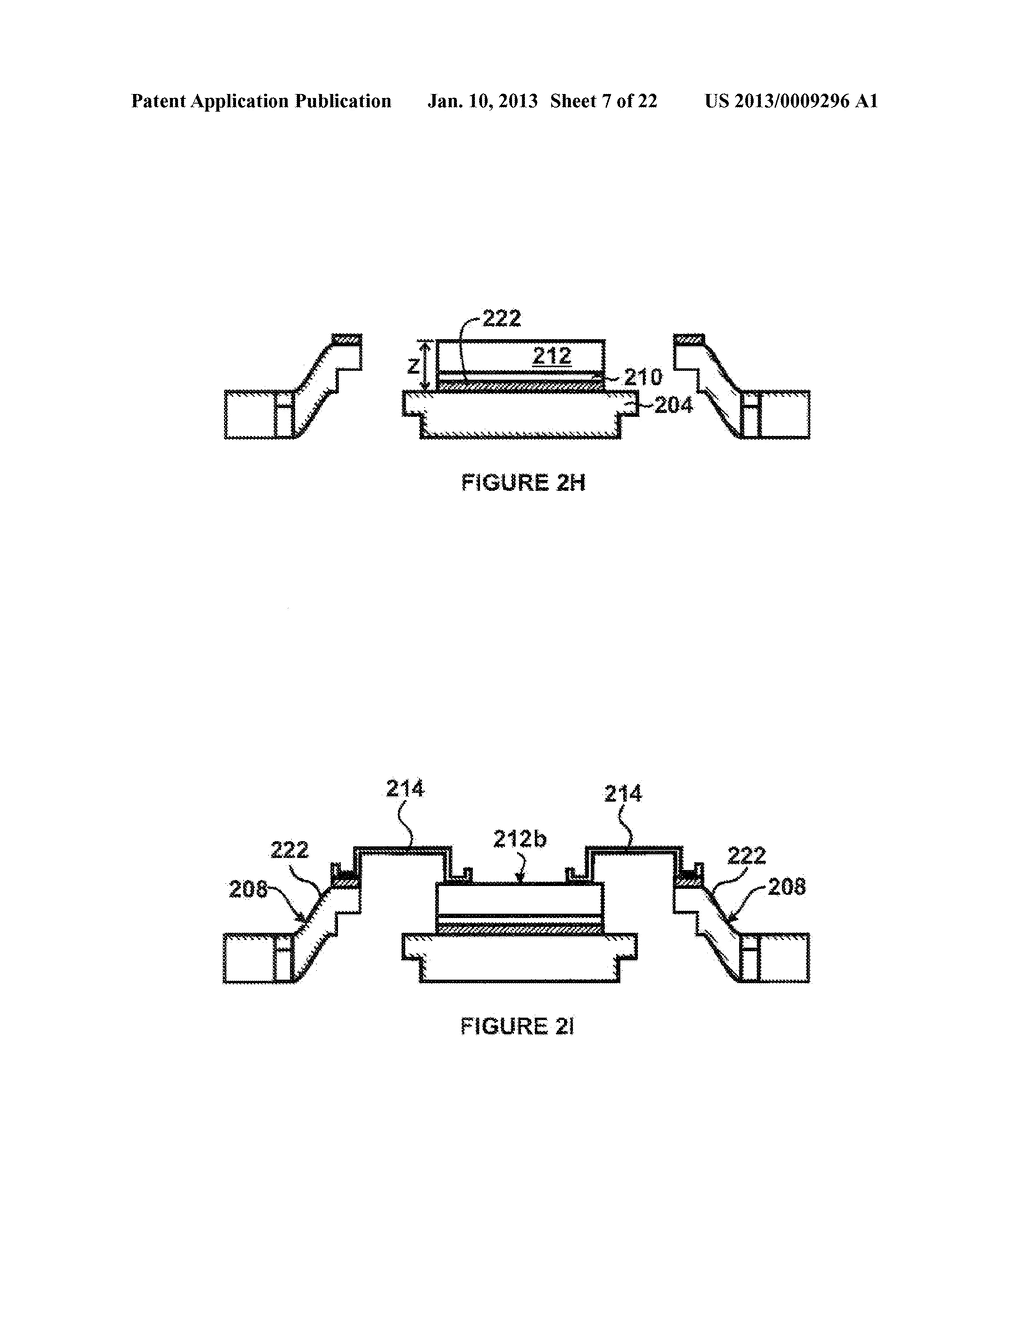 SEMICONDUCTOR DEVICE PACKAGE HAVING FEATURES FORMED BY STAMPING - diagram, schematic, and image 08